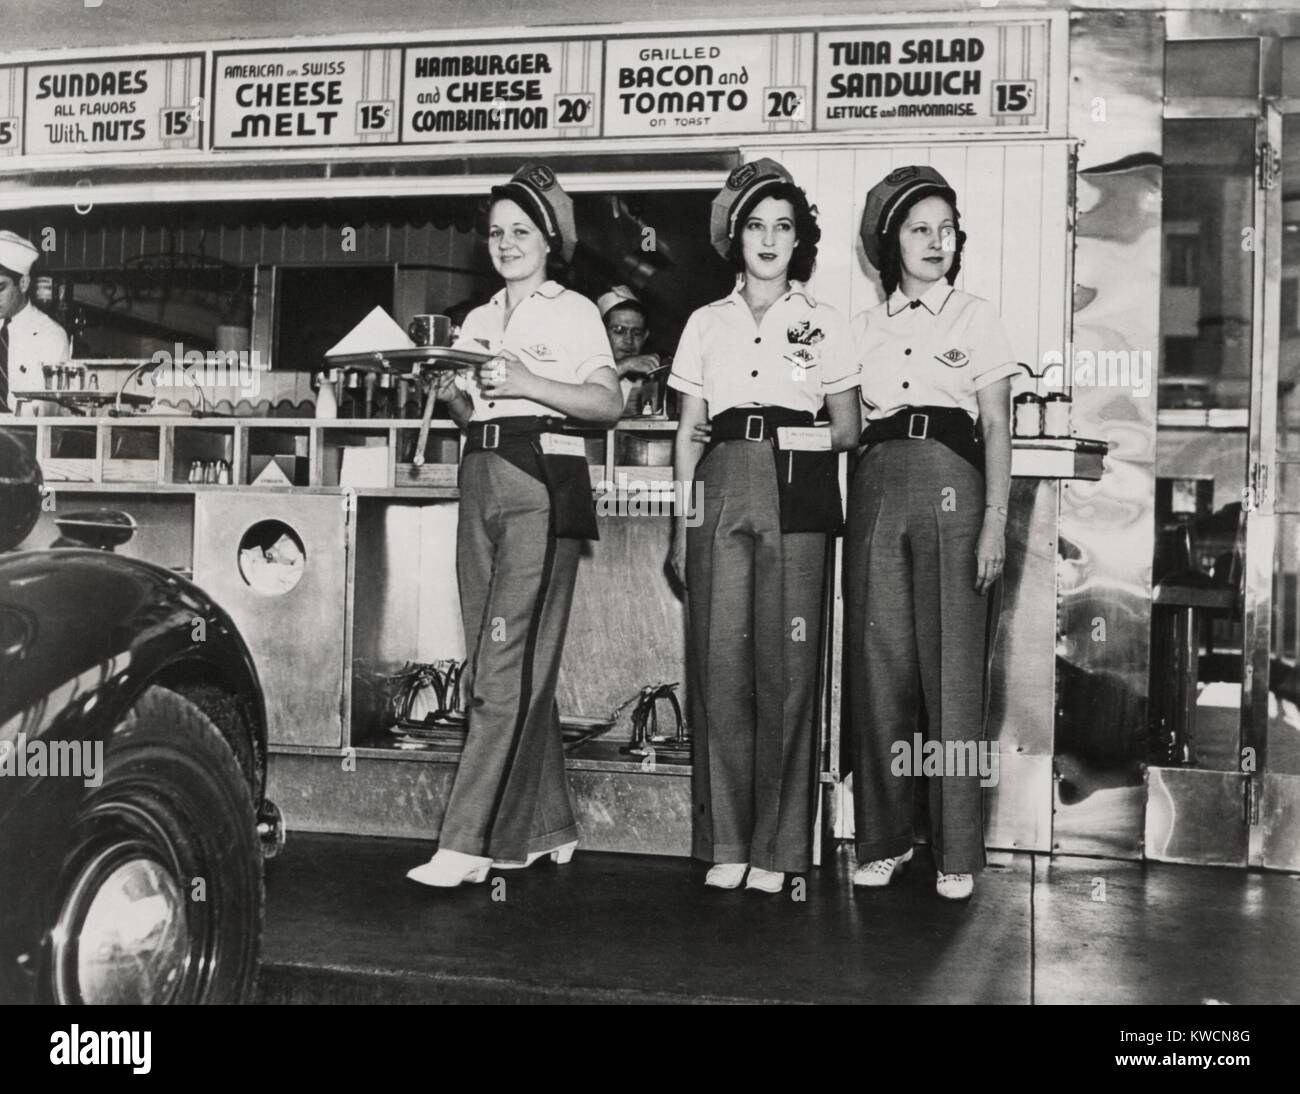 Drive-in restaurant in Hollywood, Los Angeles. June 29, 1938. The waitresses wear pseudo Highway Patrol Uniforms. The Fast Food menu includes: Hamburger and Cheese Combination; American and Swiss Cheese Melts, Grilled Bacon and Tomato on Toast; and Tuna Salad Sandwich. - (BSLOC 2014 17 115) Stock Photo